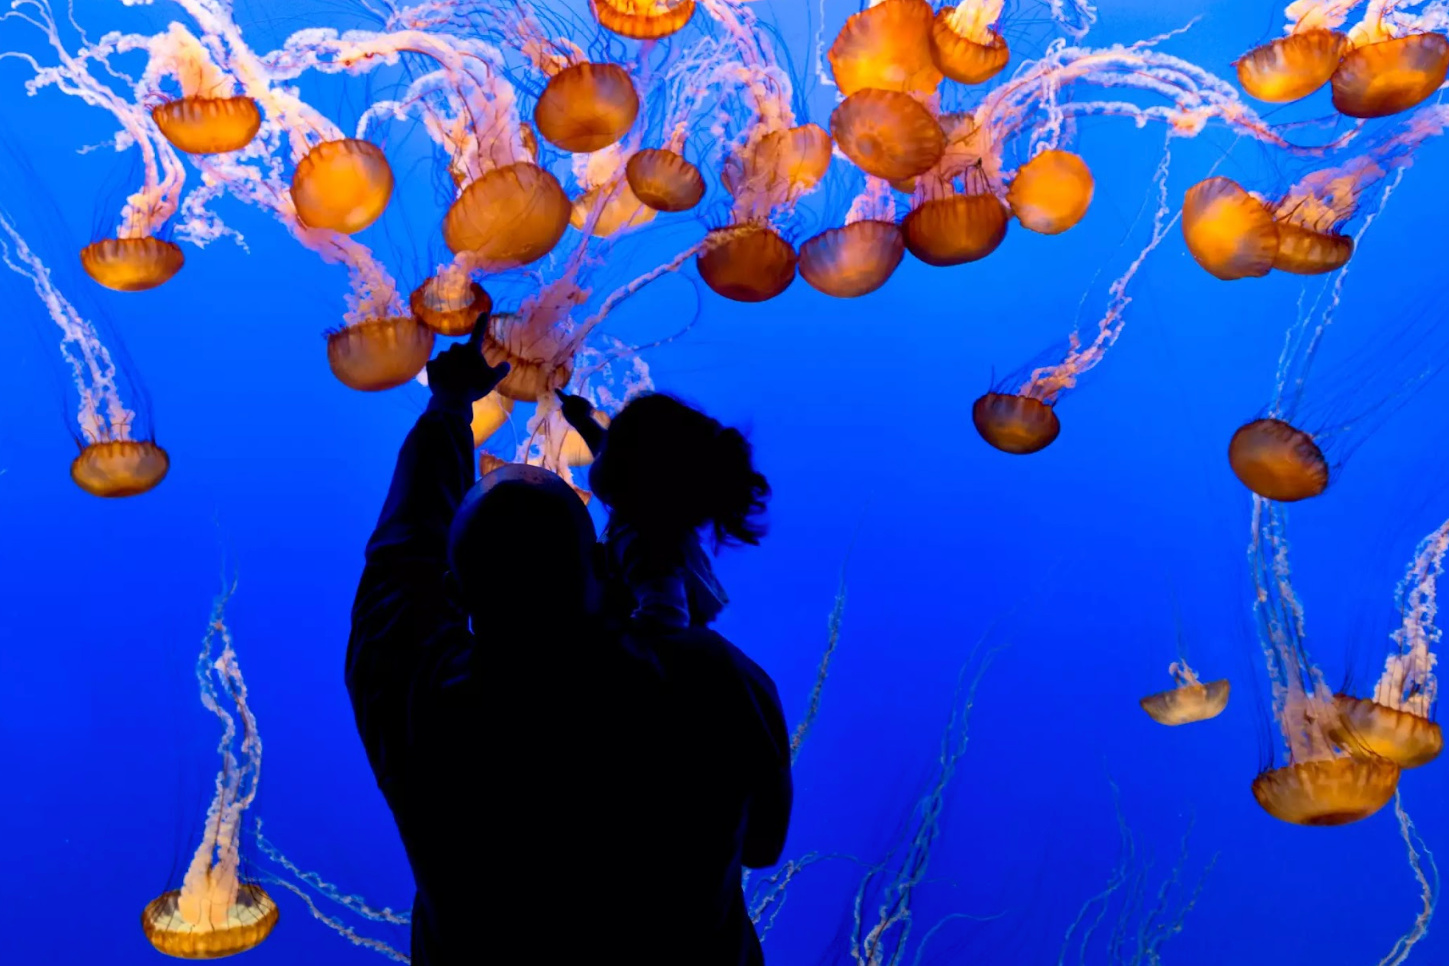 A man carrying a small child is silhouetted in front of a tank filled with bright orange jellyfish. 